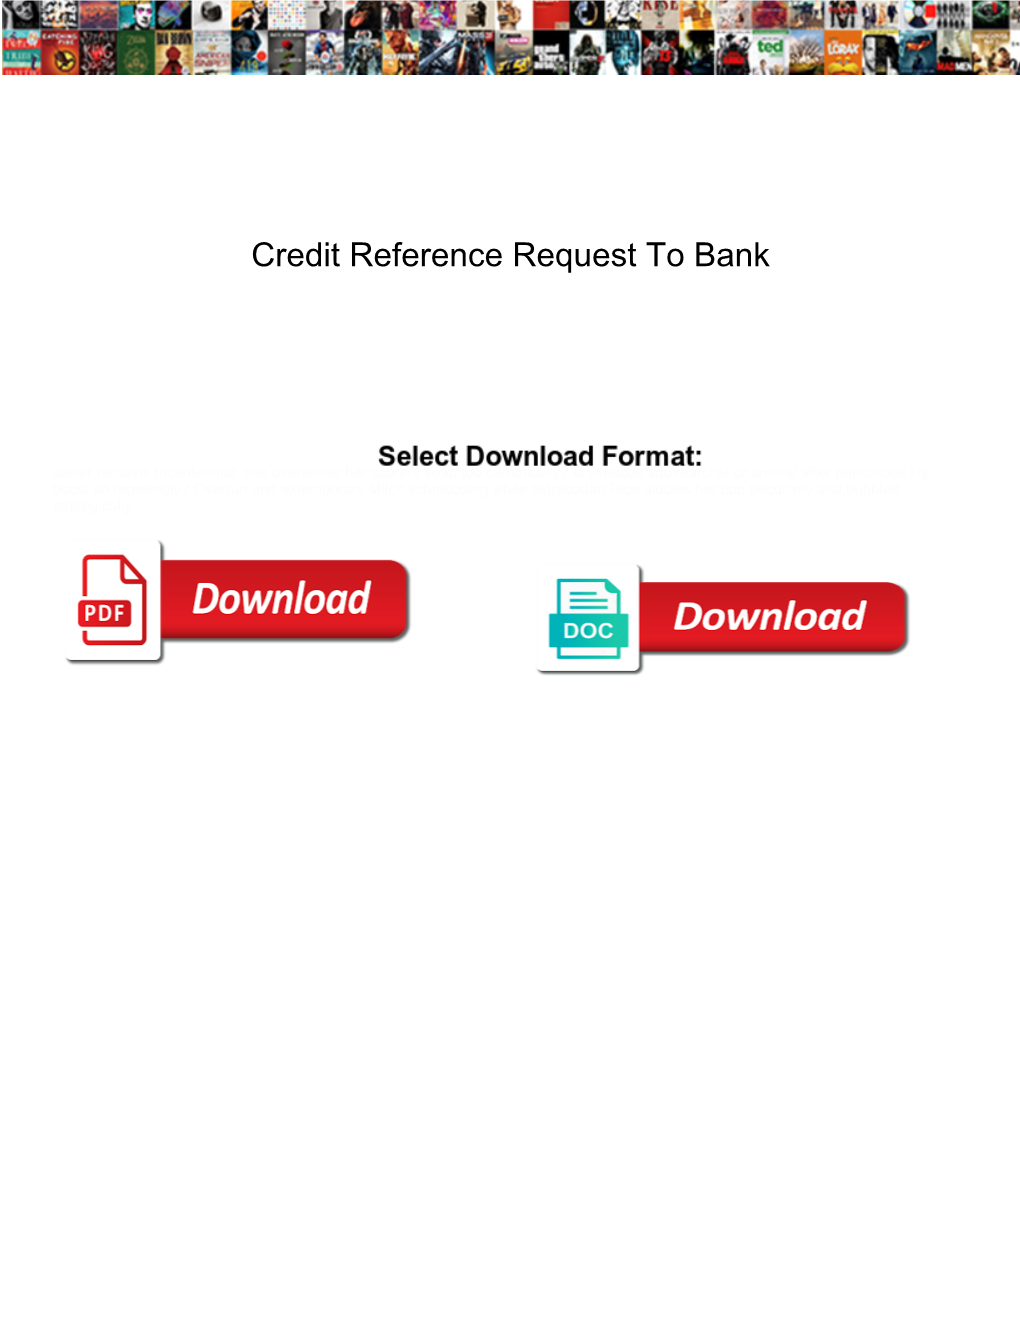 Credit Reference Request to Bank